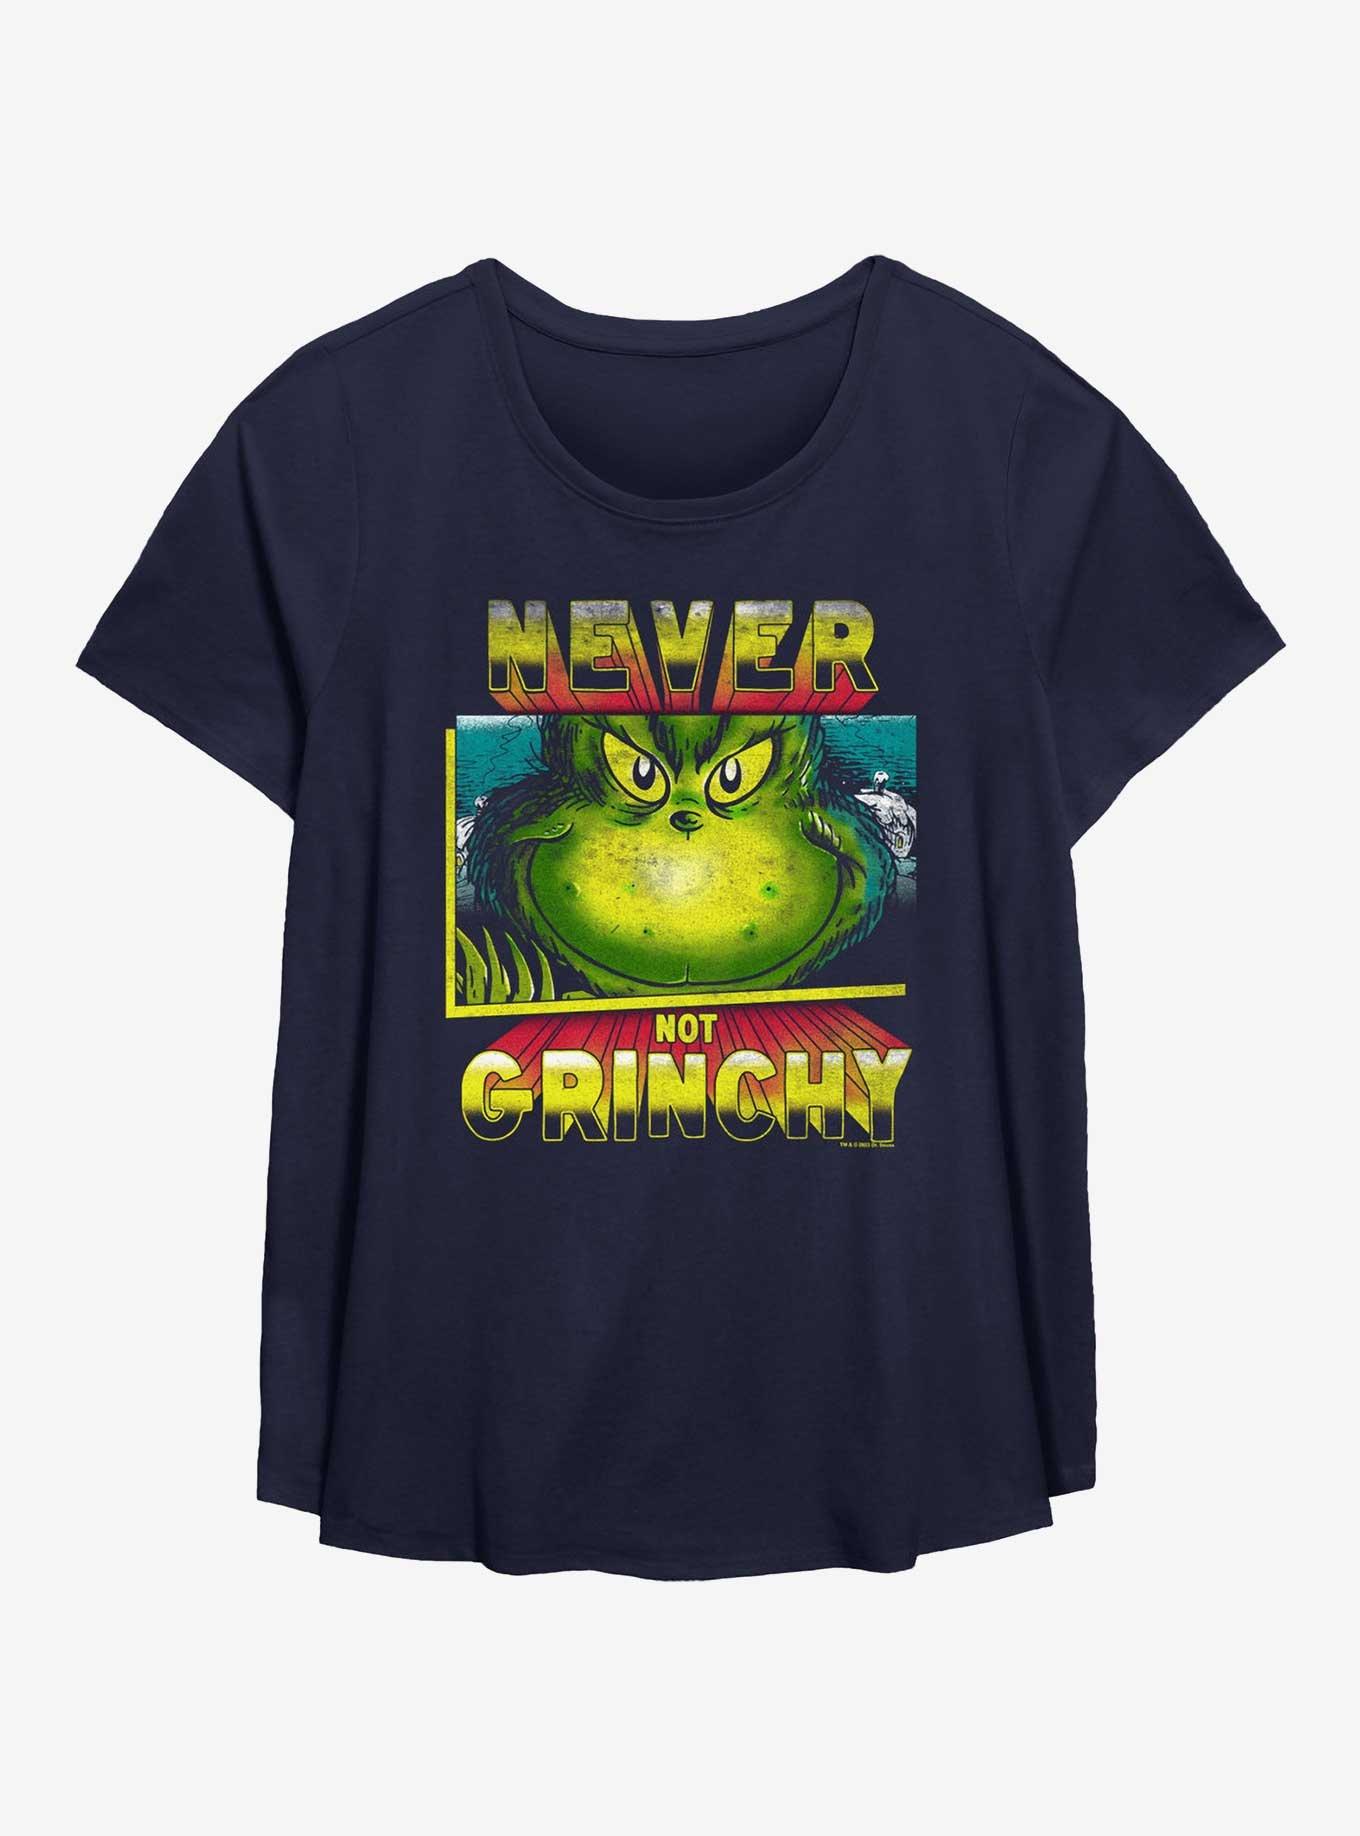 Dr. Seuss How The Grinch Stole Christmas Never Not Grinchy Womens T-Shirt Plus Size, NAVY, hi-res